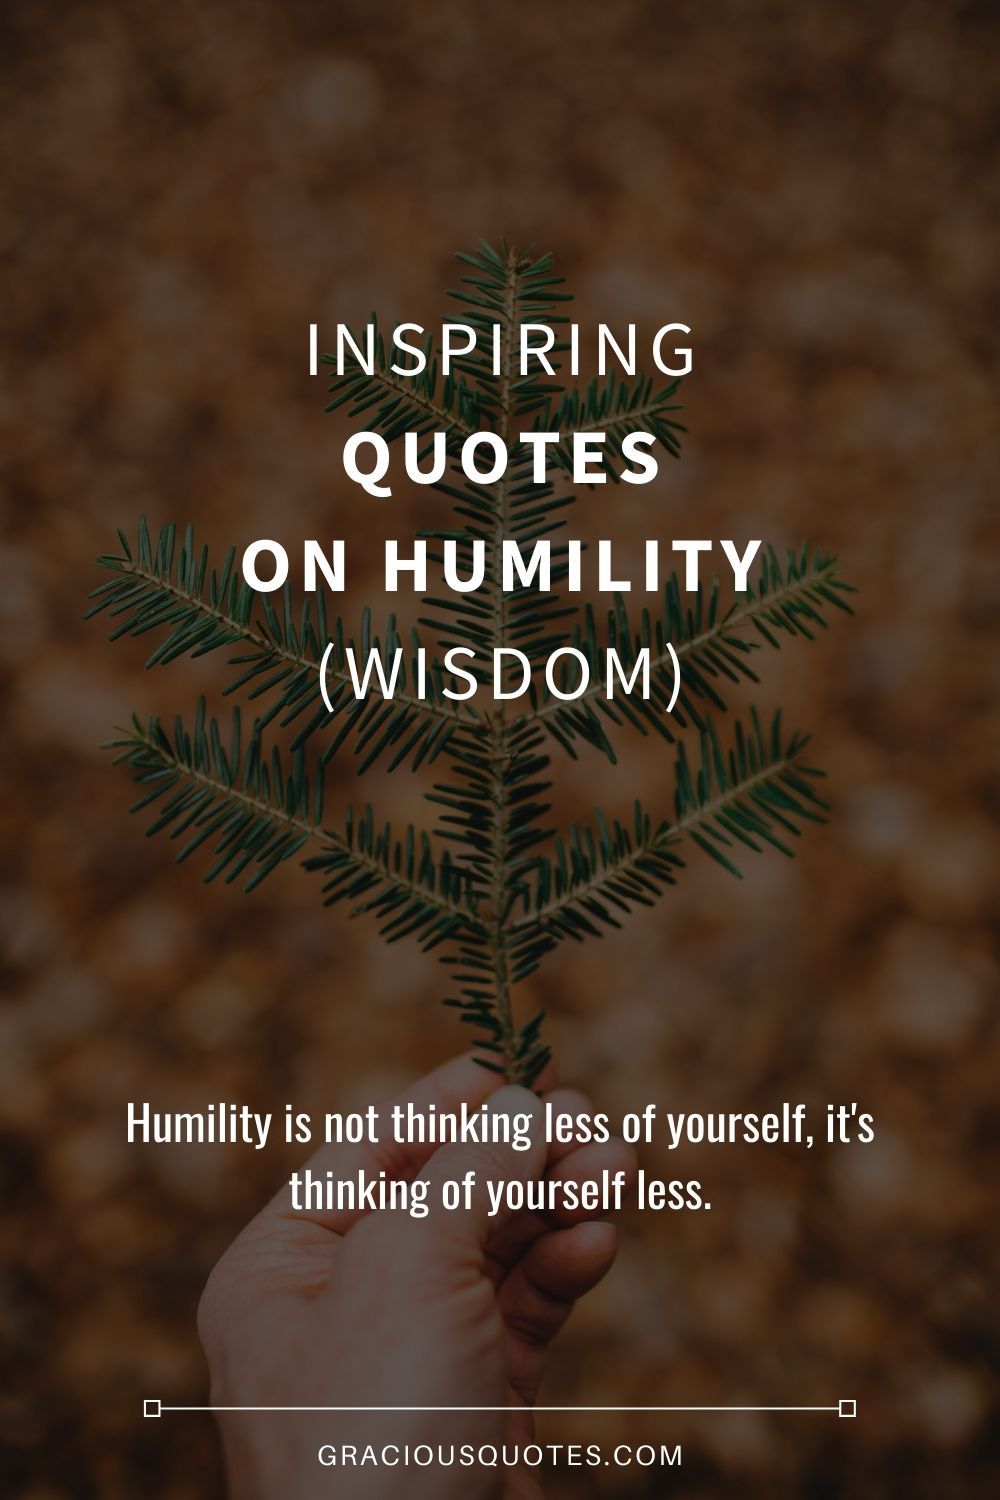 Inspiring Quotes on Humility (WISDOM) - Gracious Quotes